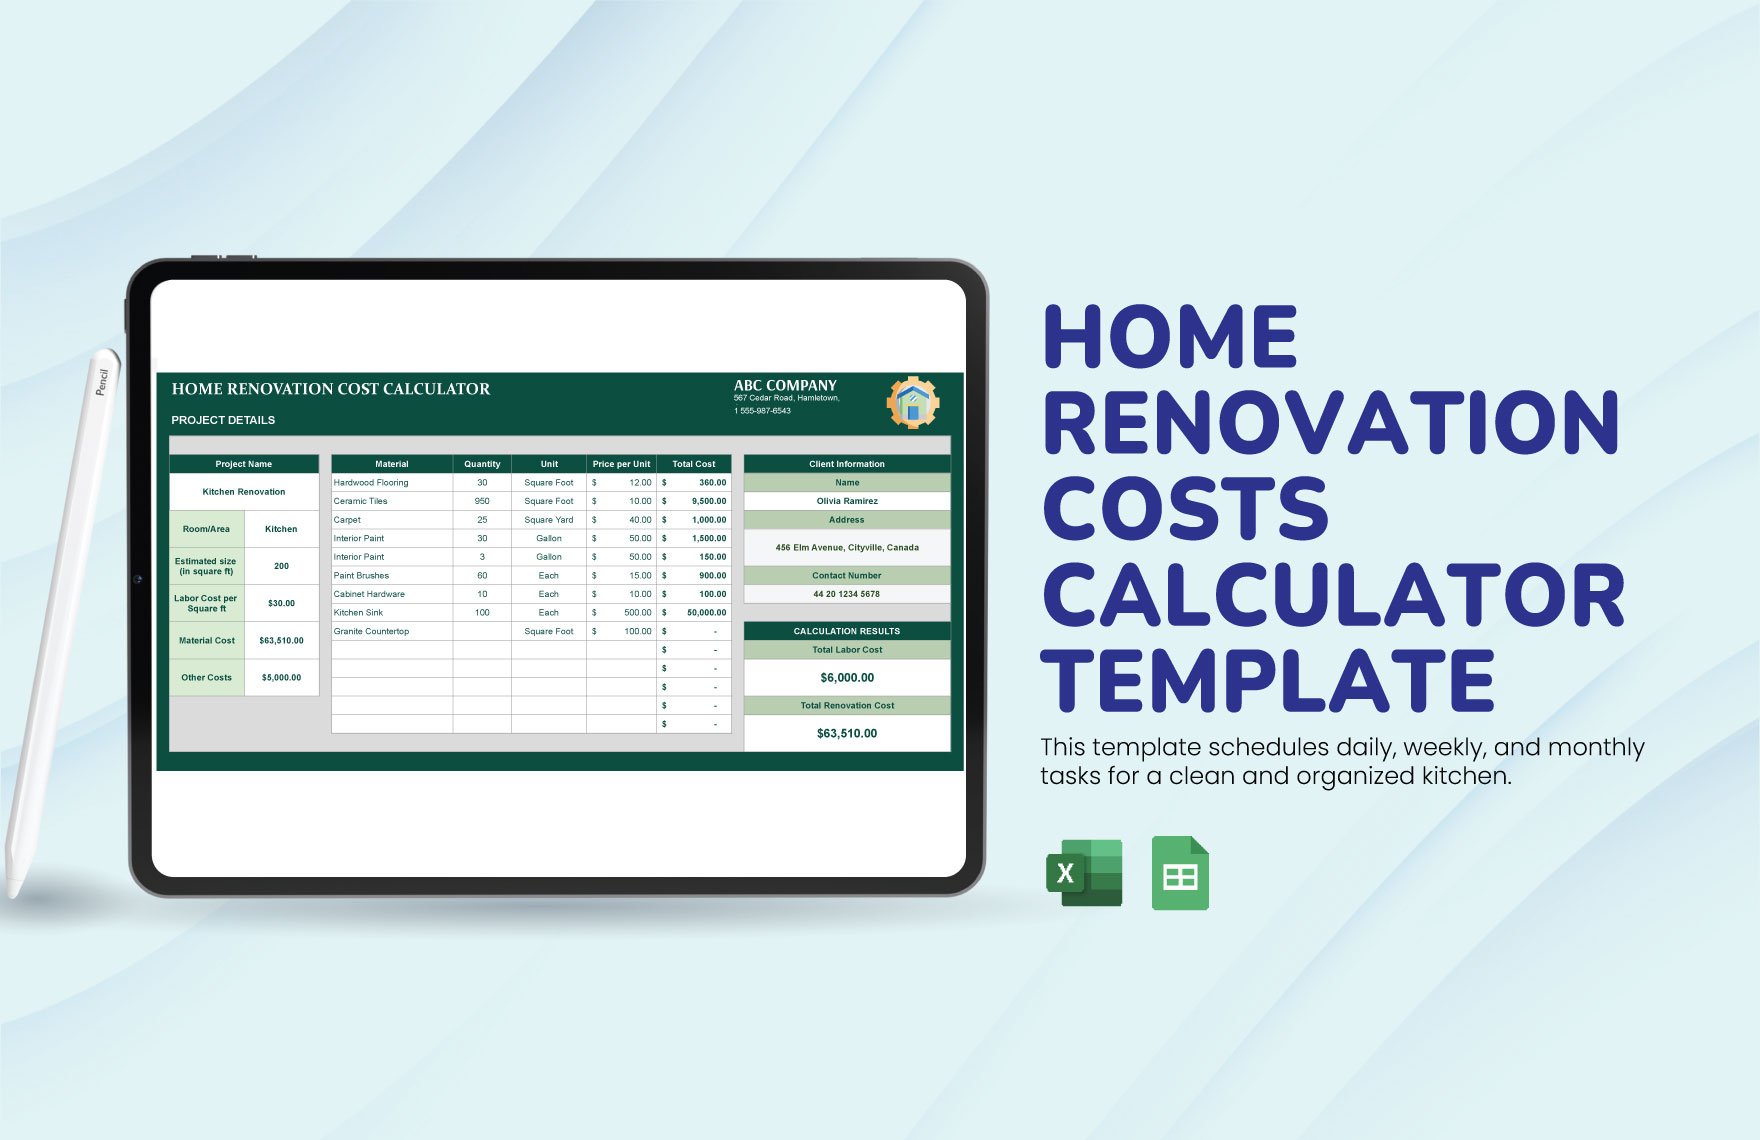 Home Renovation Costs Calculator Template